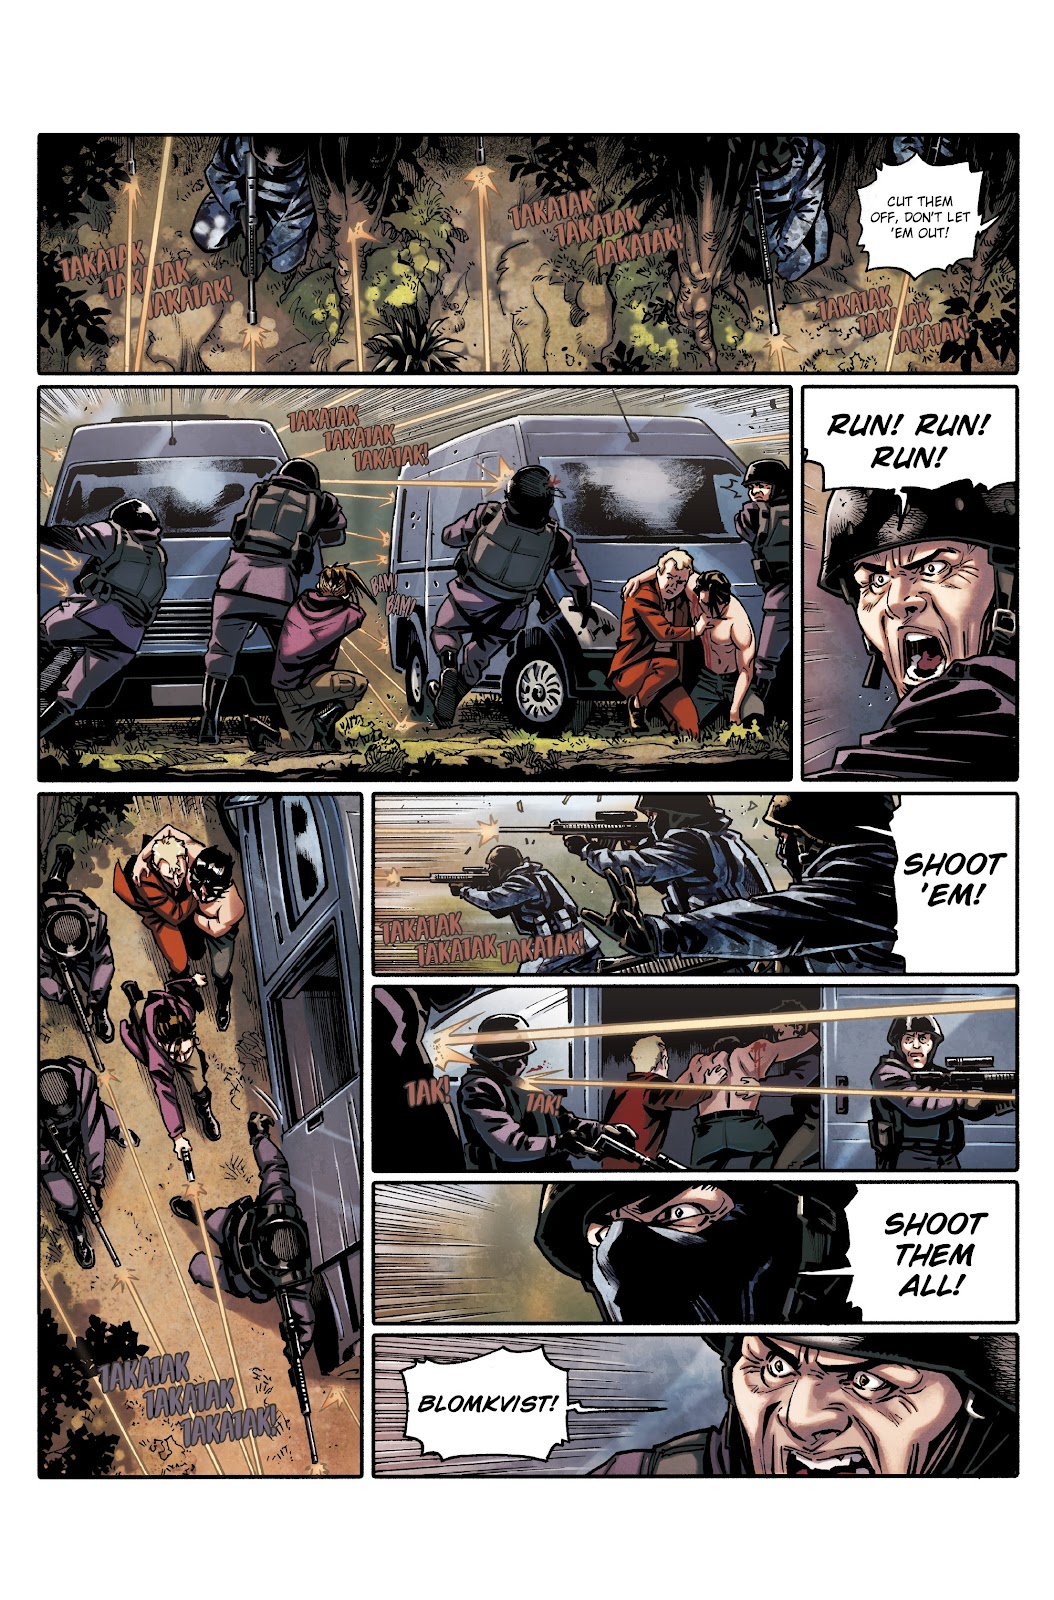 Millennium: The Girl Who Danced With Death issue 3 - Page 30